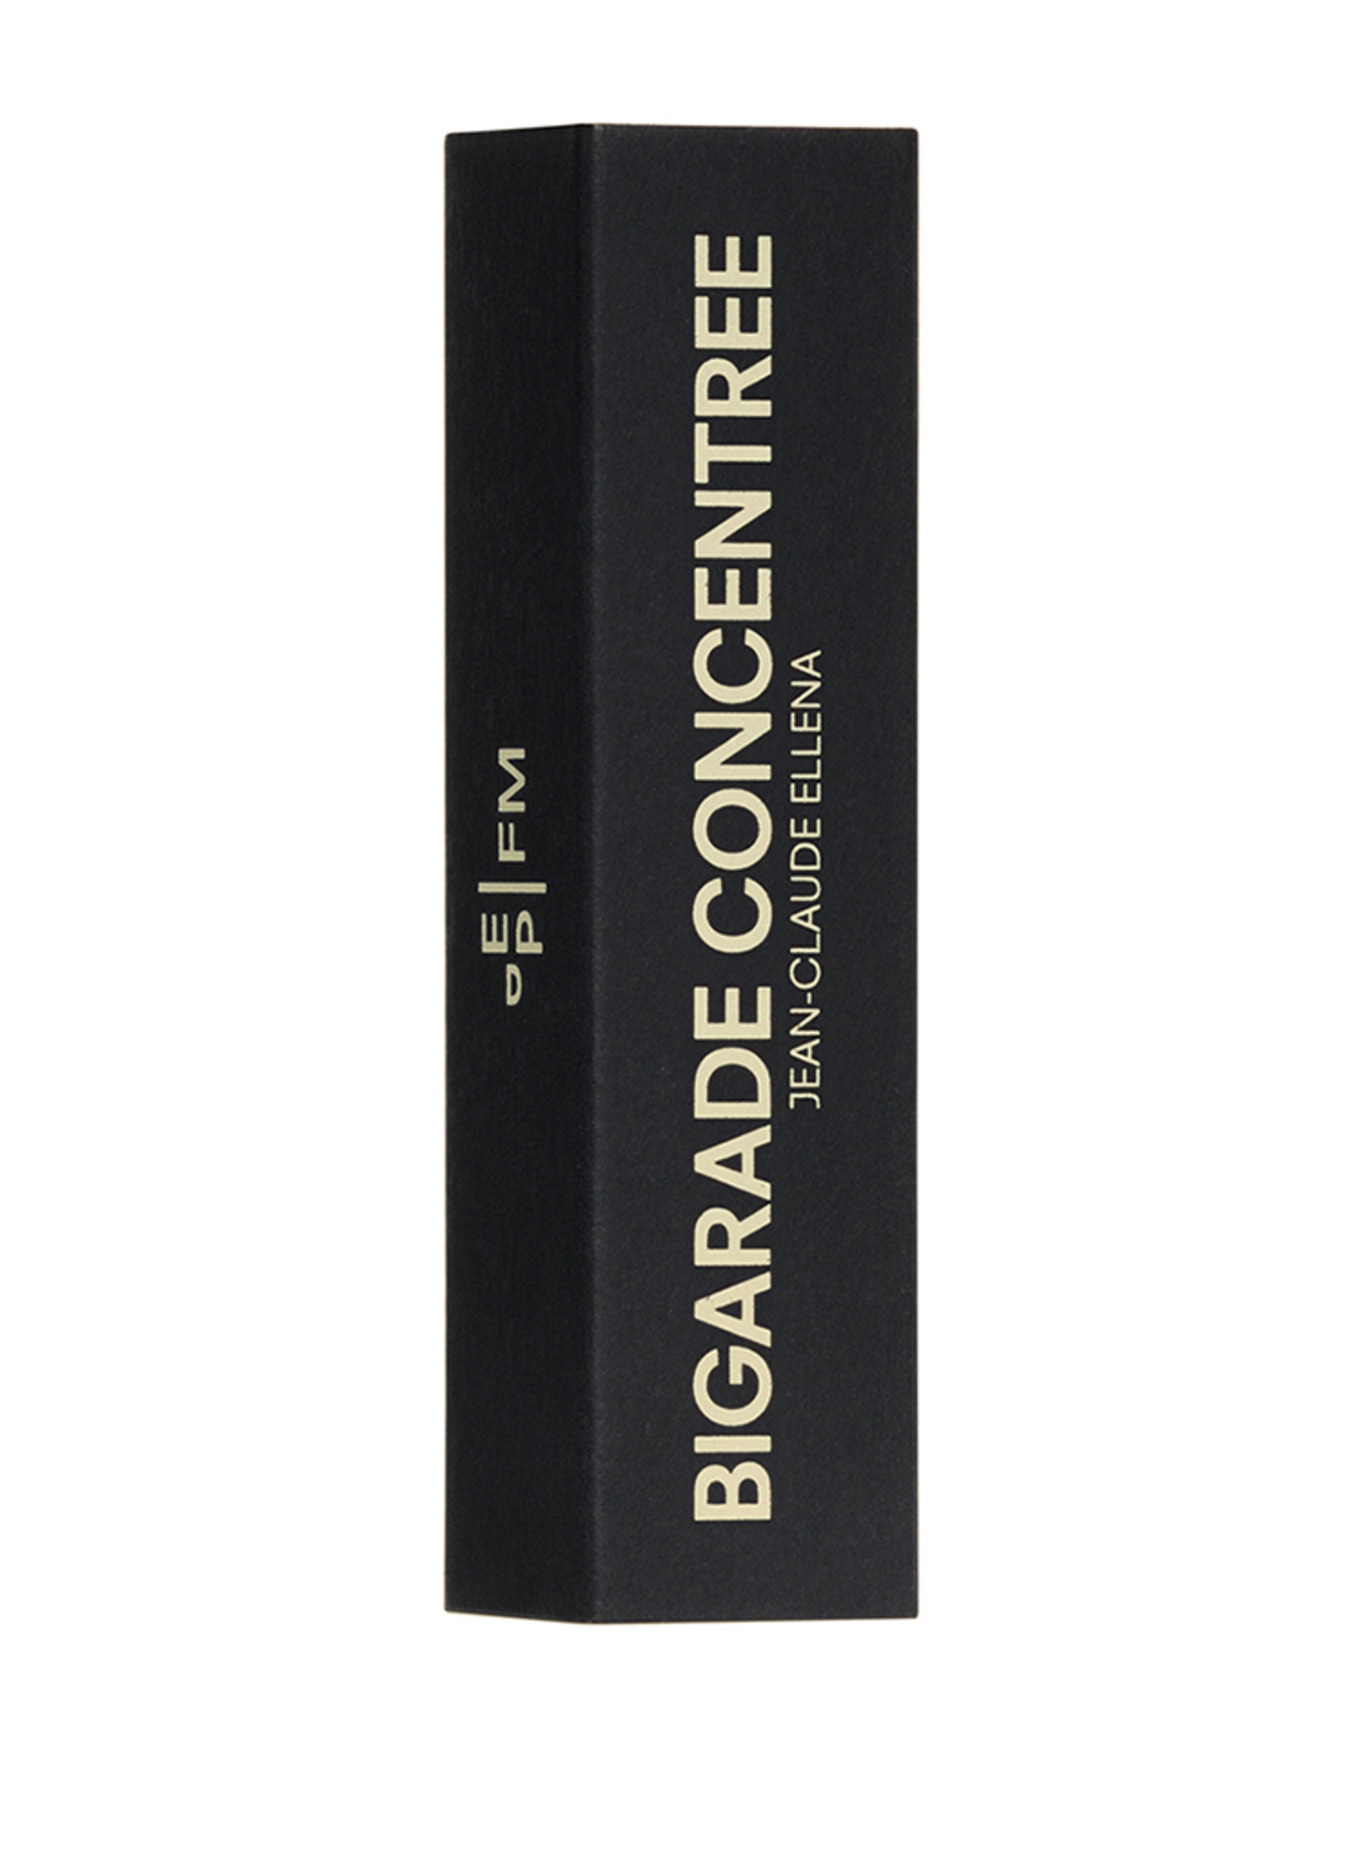 EDITIONS DE PARFUMS FREDERIC MALLE BIGARADE CONCENTREE (Obrazek 2)